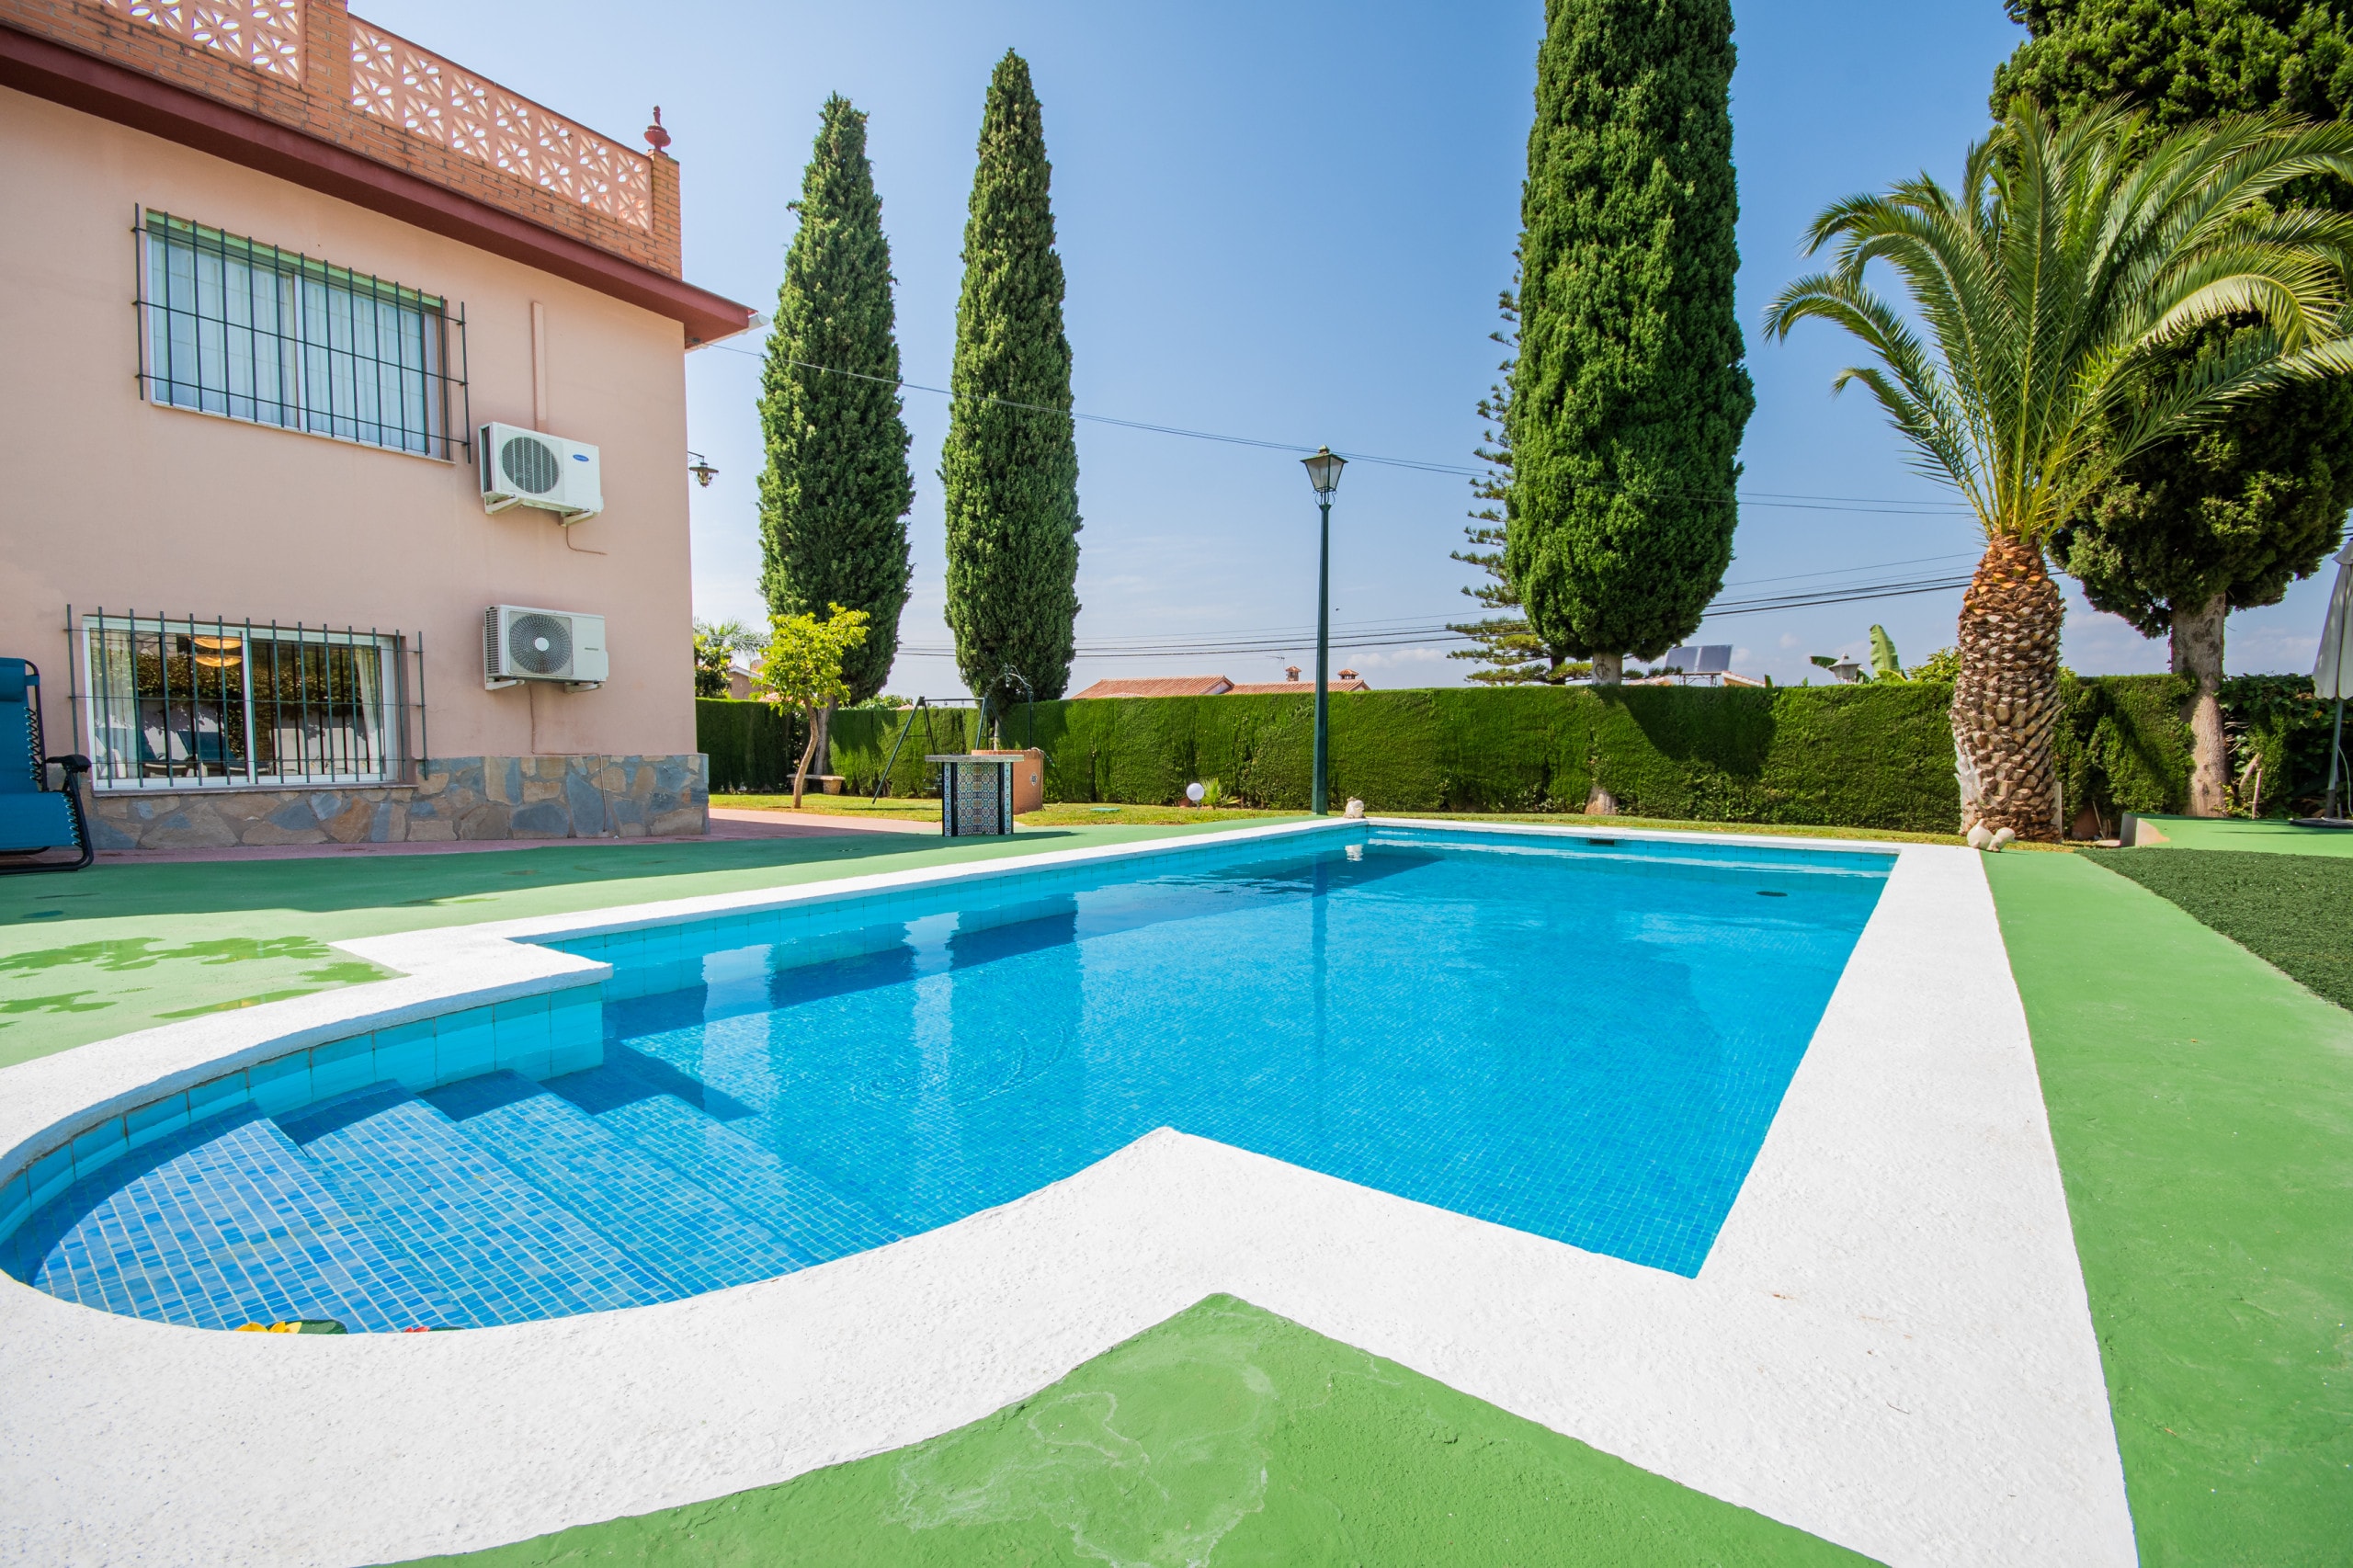 Enjoy the private pool of this house in Alhaurín de la Torre.